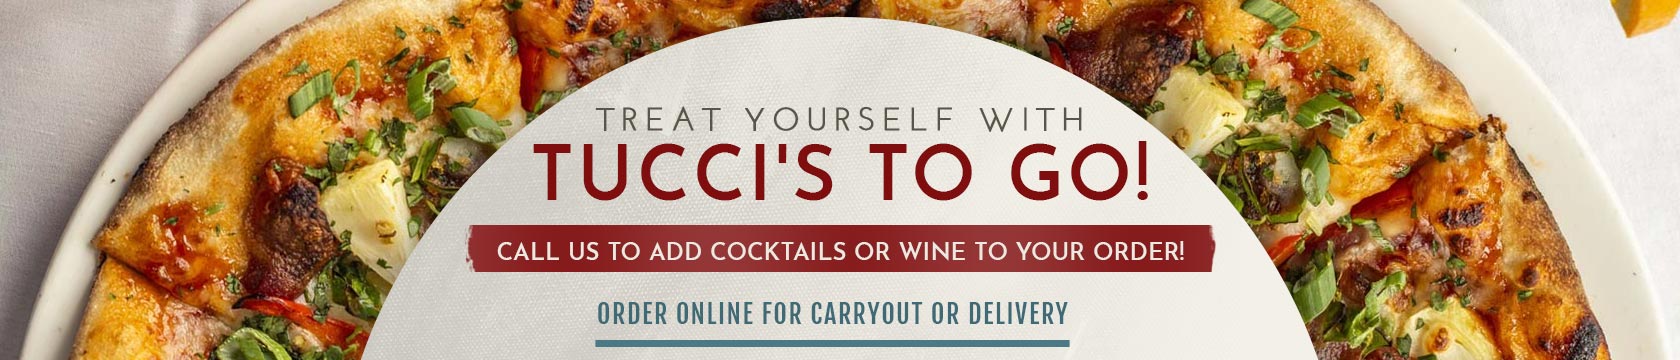 Treat Yourself with Tucci’s To Go! Order Online for Carryout or Deliver! Call us to add cocktails or wine to your order!